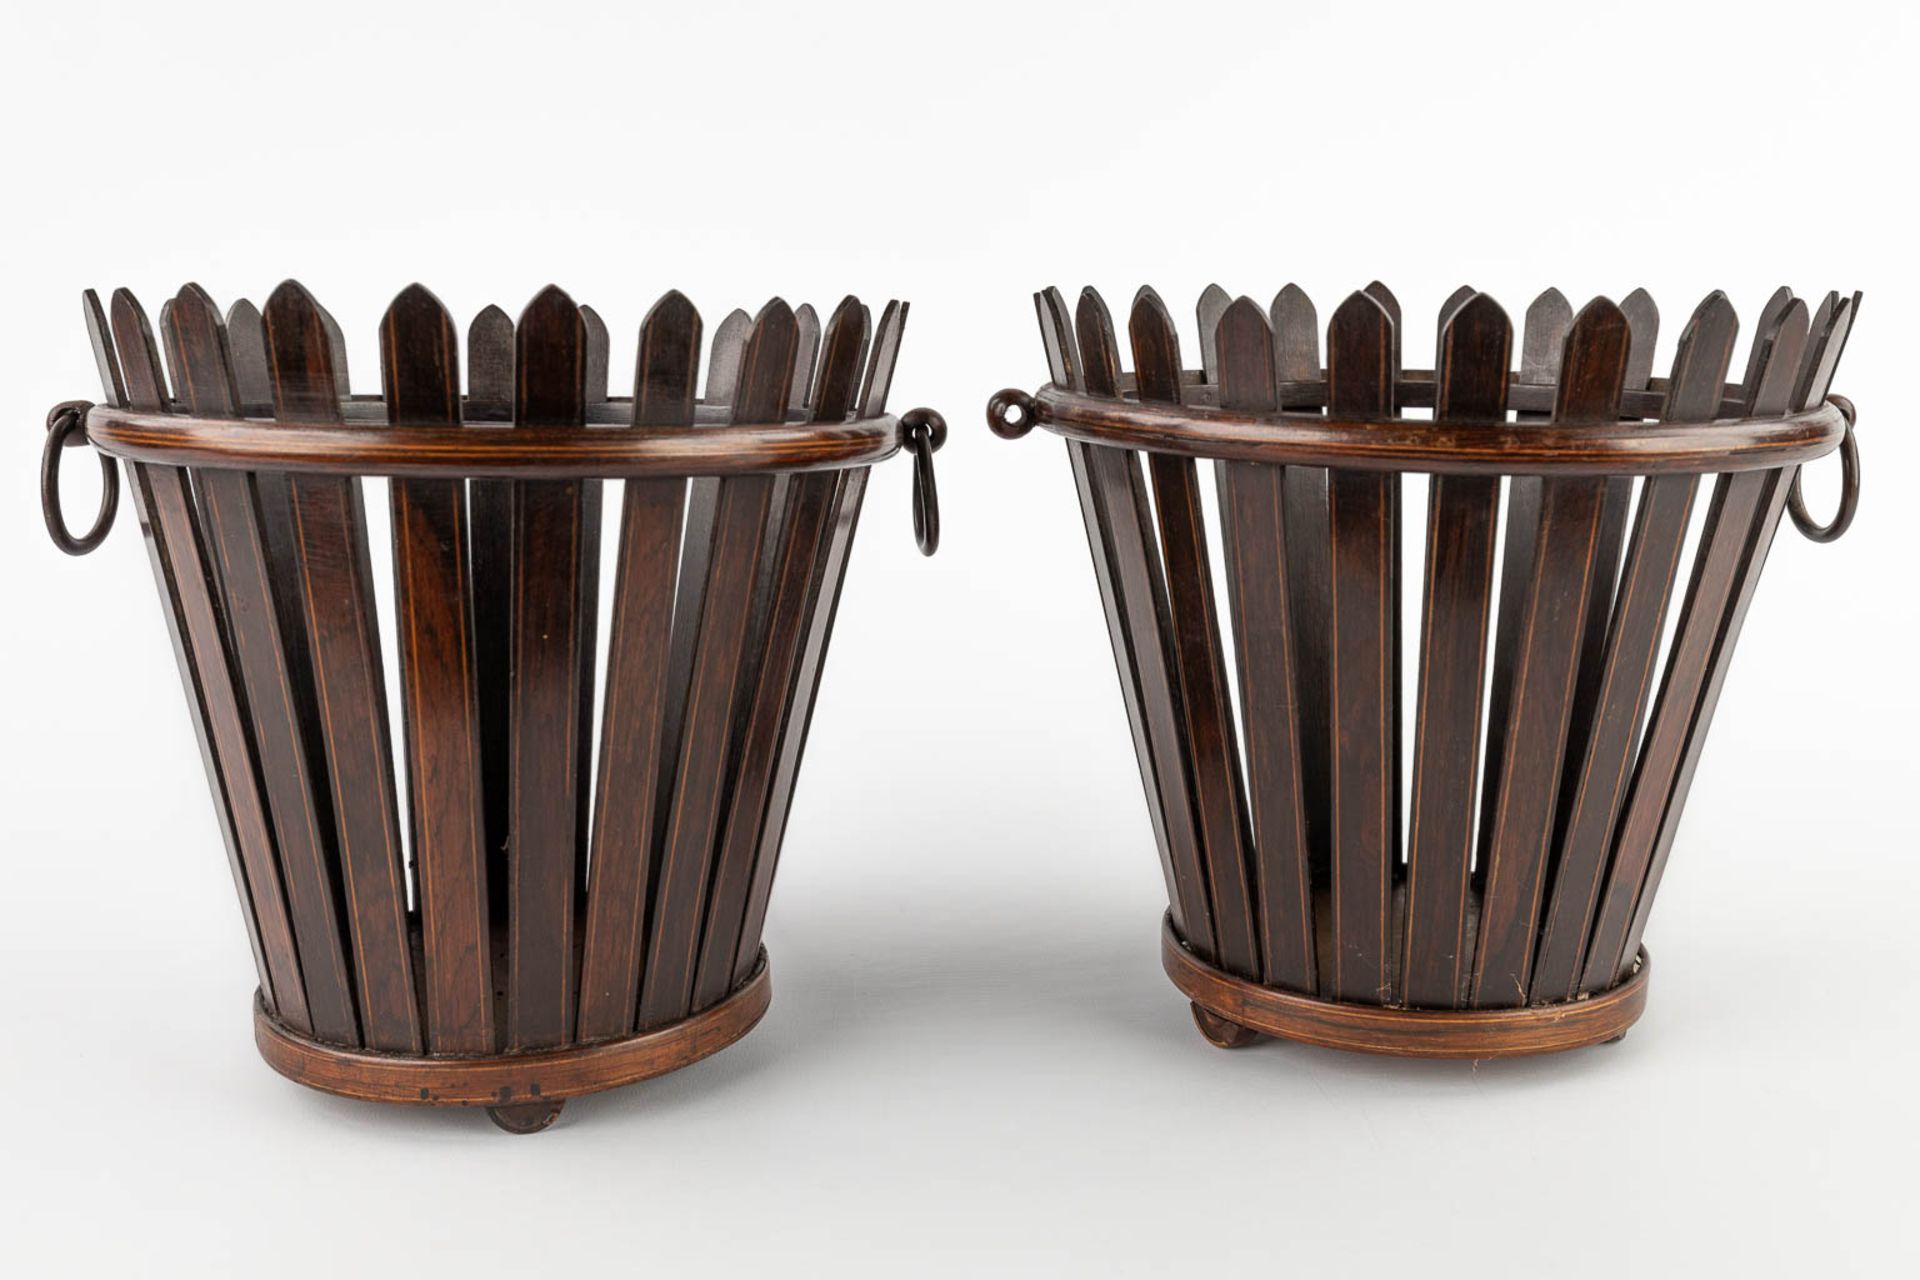 A pair of Edwardian flower baskets, mahogany, England. (H:21 x D:23 cm) - Image 5 of 11